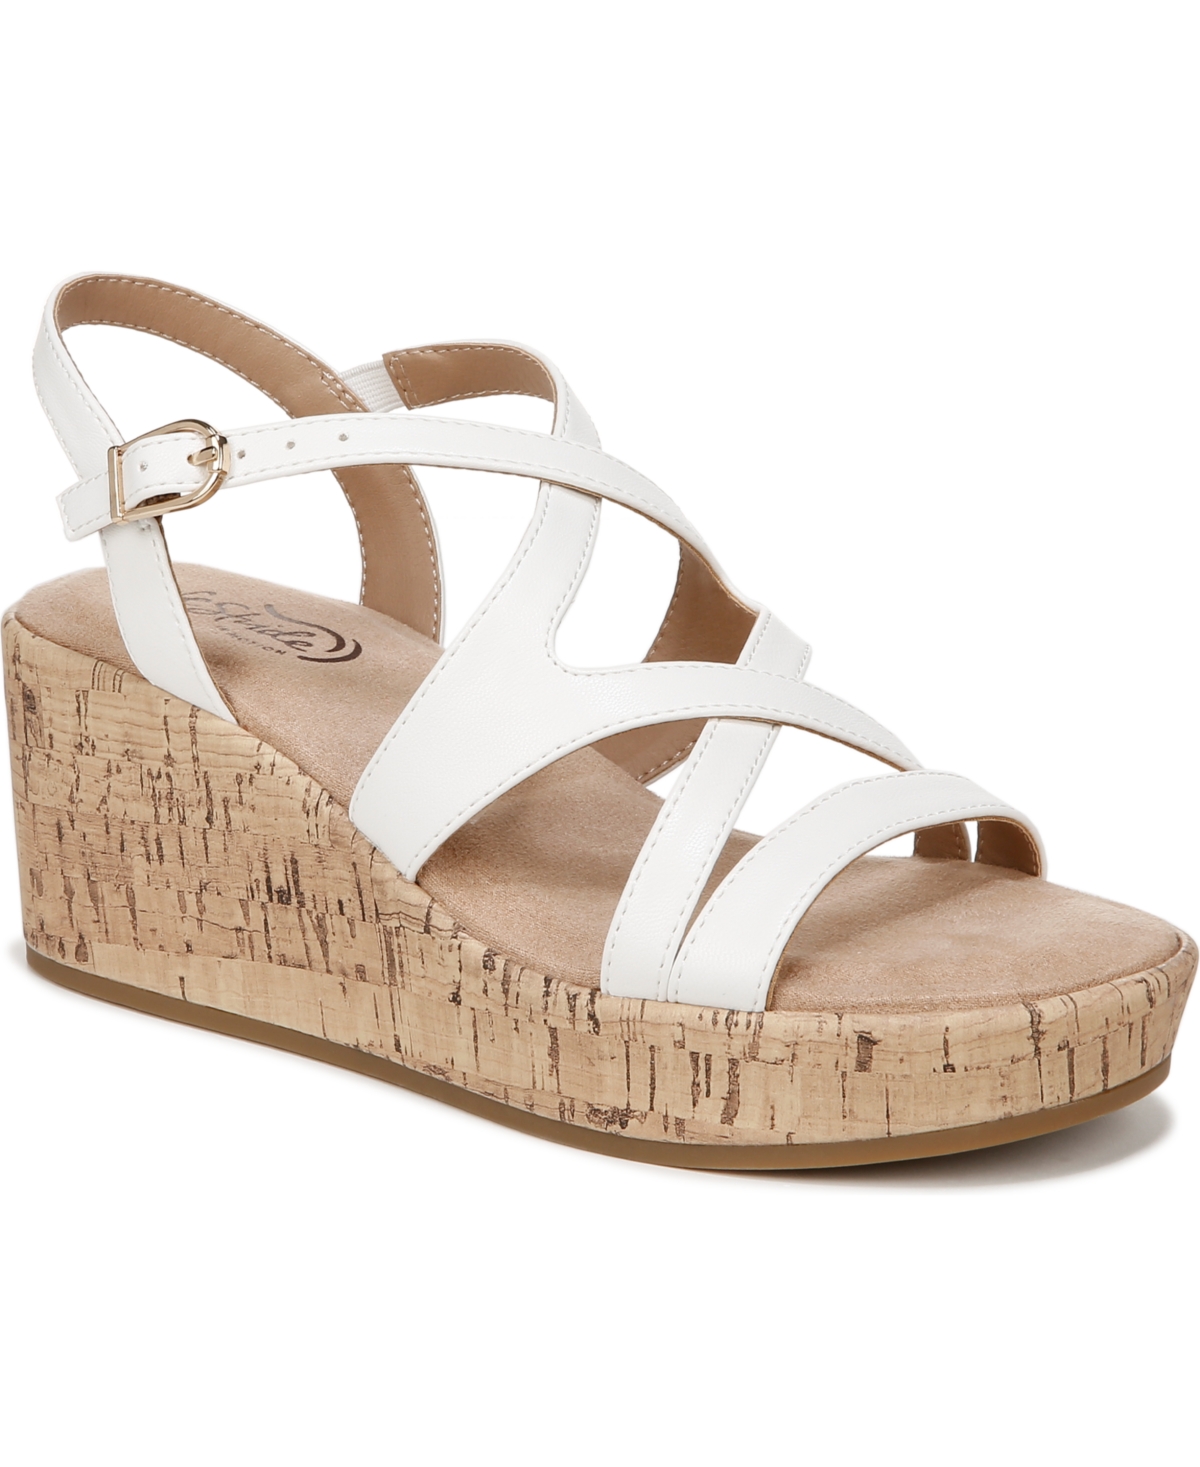 Bailey Strappy Platform Sandals - Bright White Faux Leather